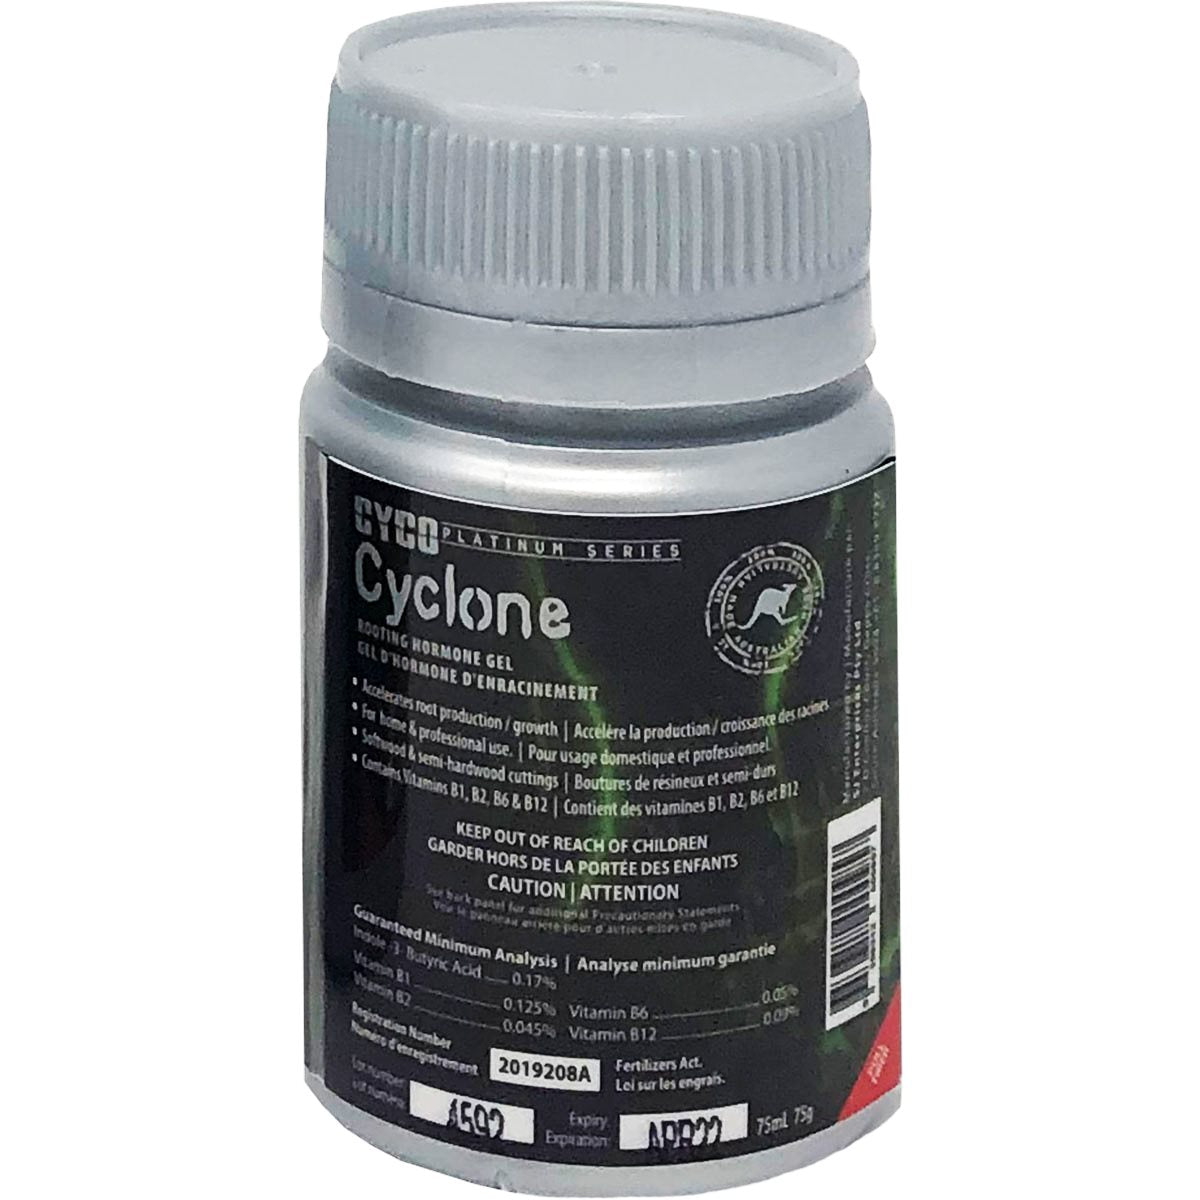 Product Secondary Image:Cyco Cyclone